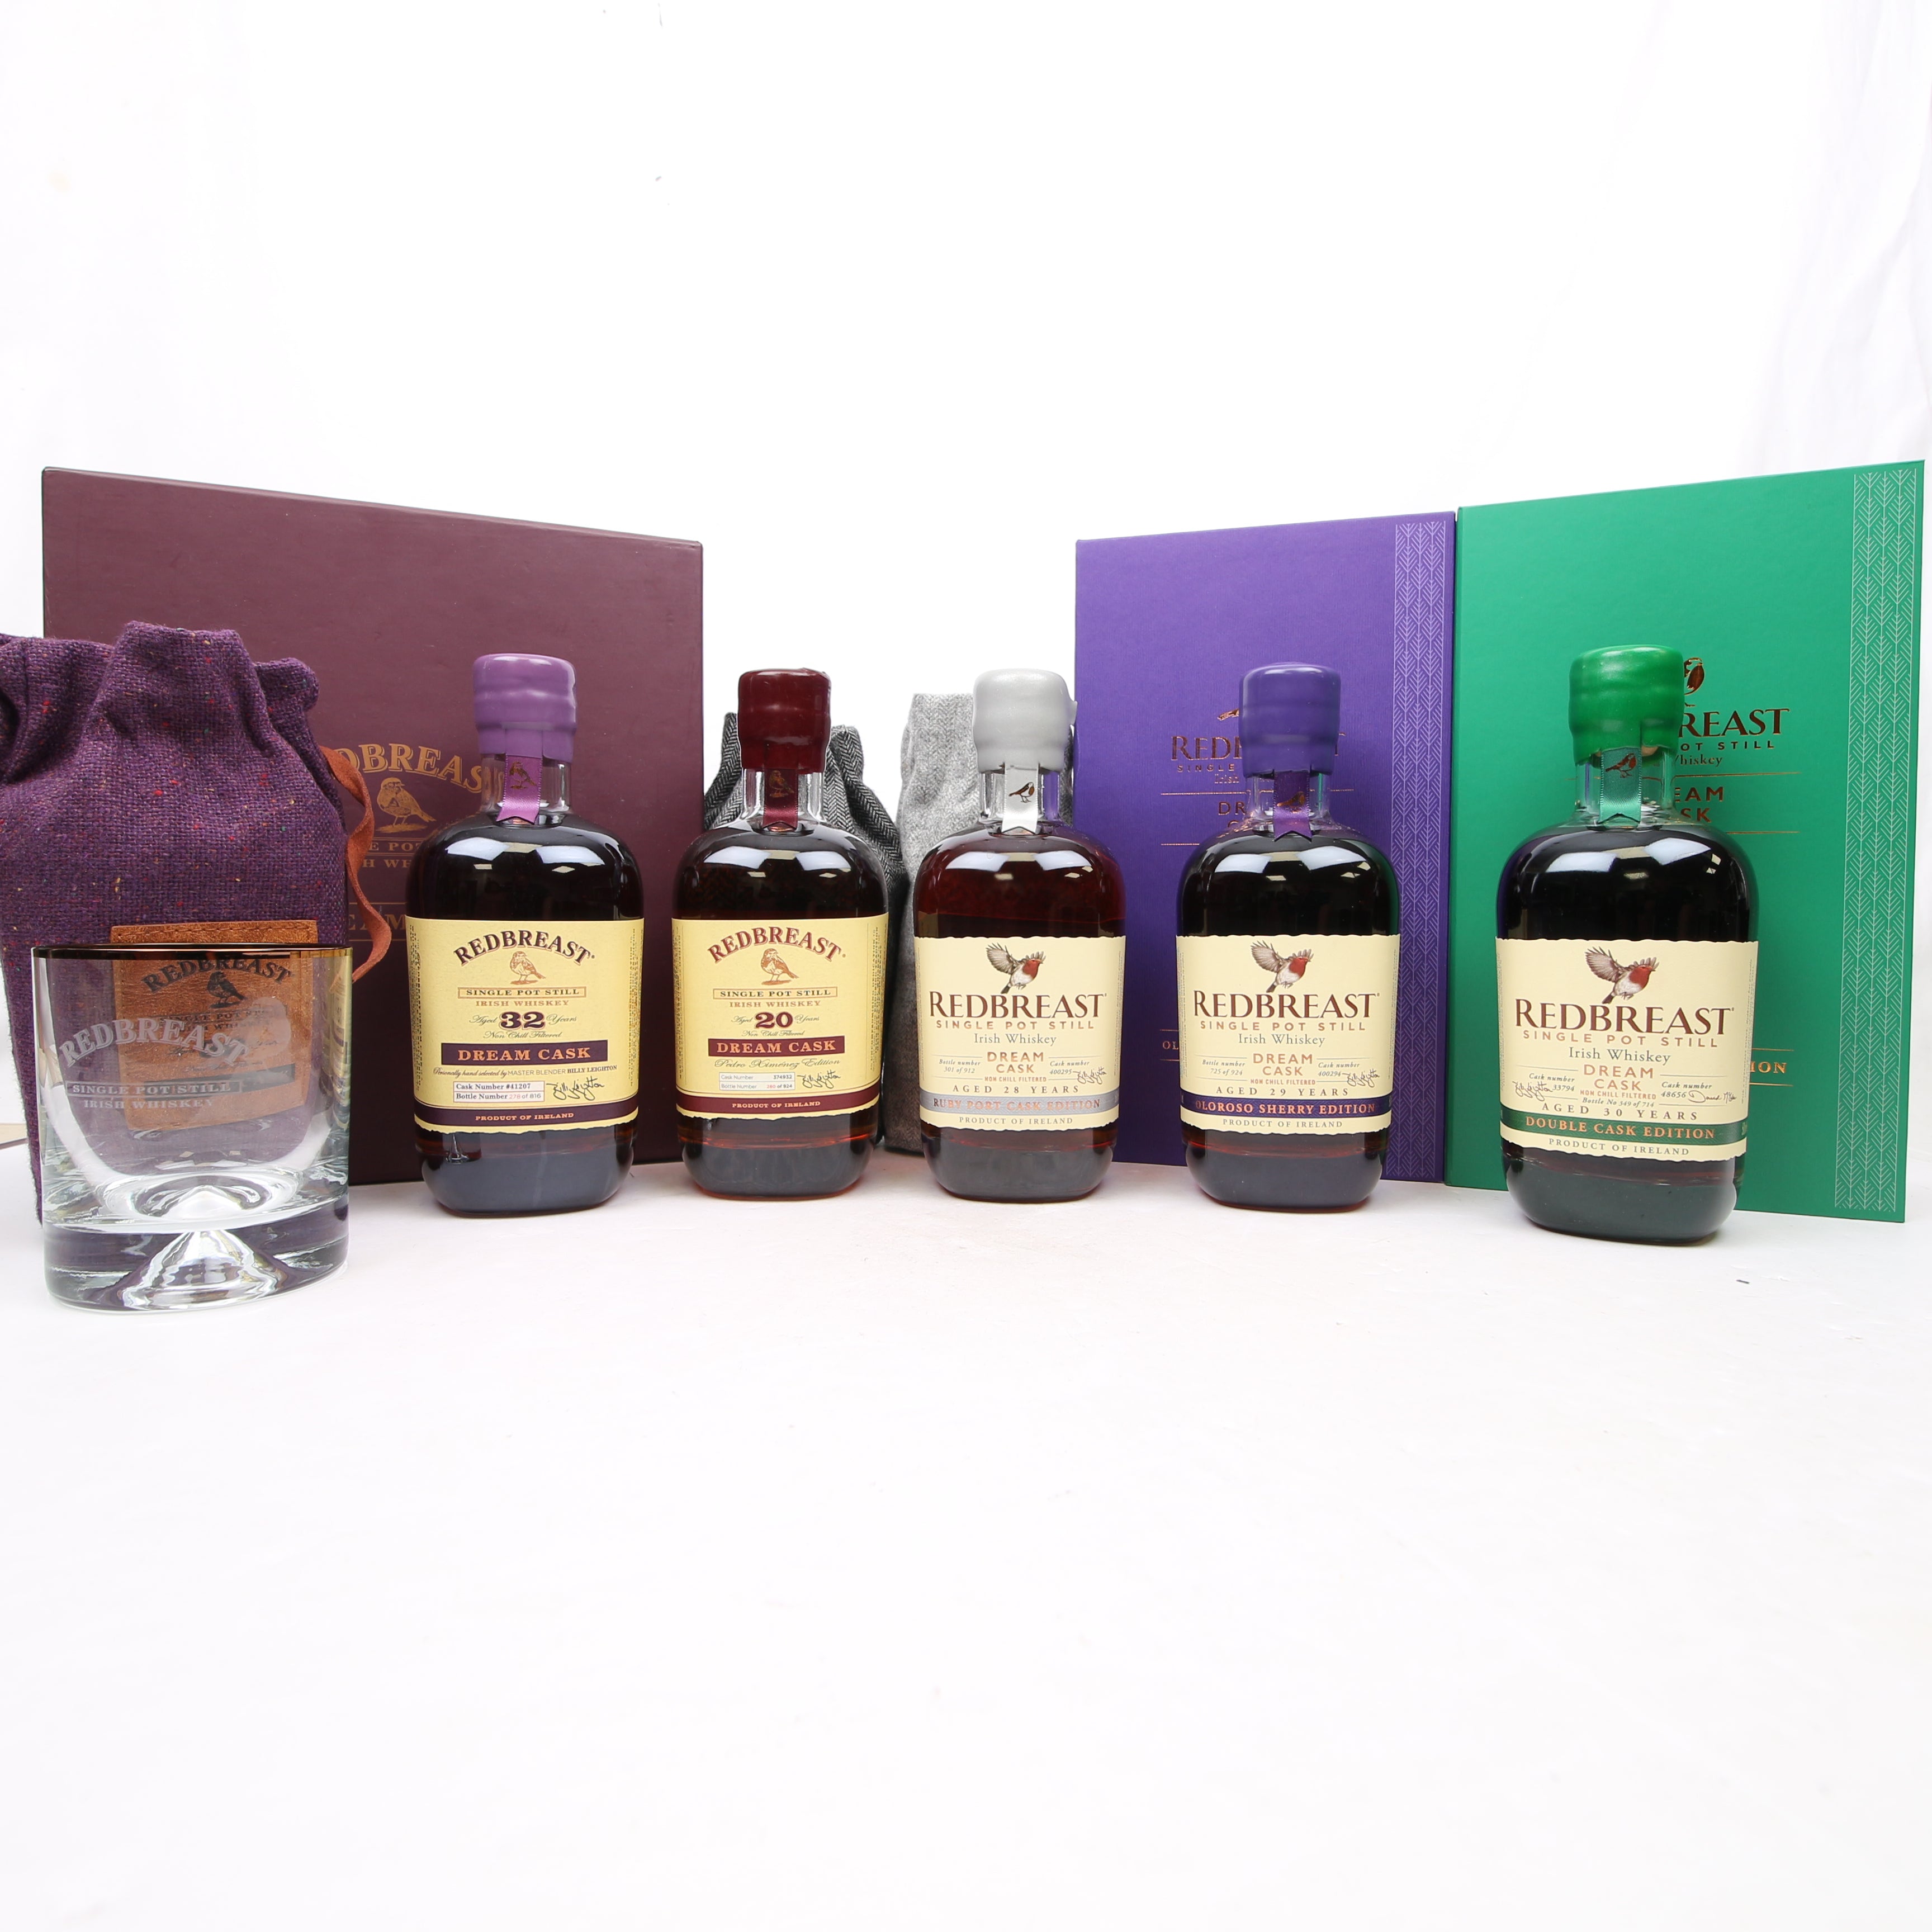 Redbreast Dream Cask Collection - 5 Bottles